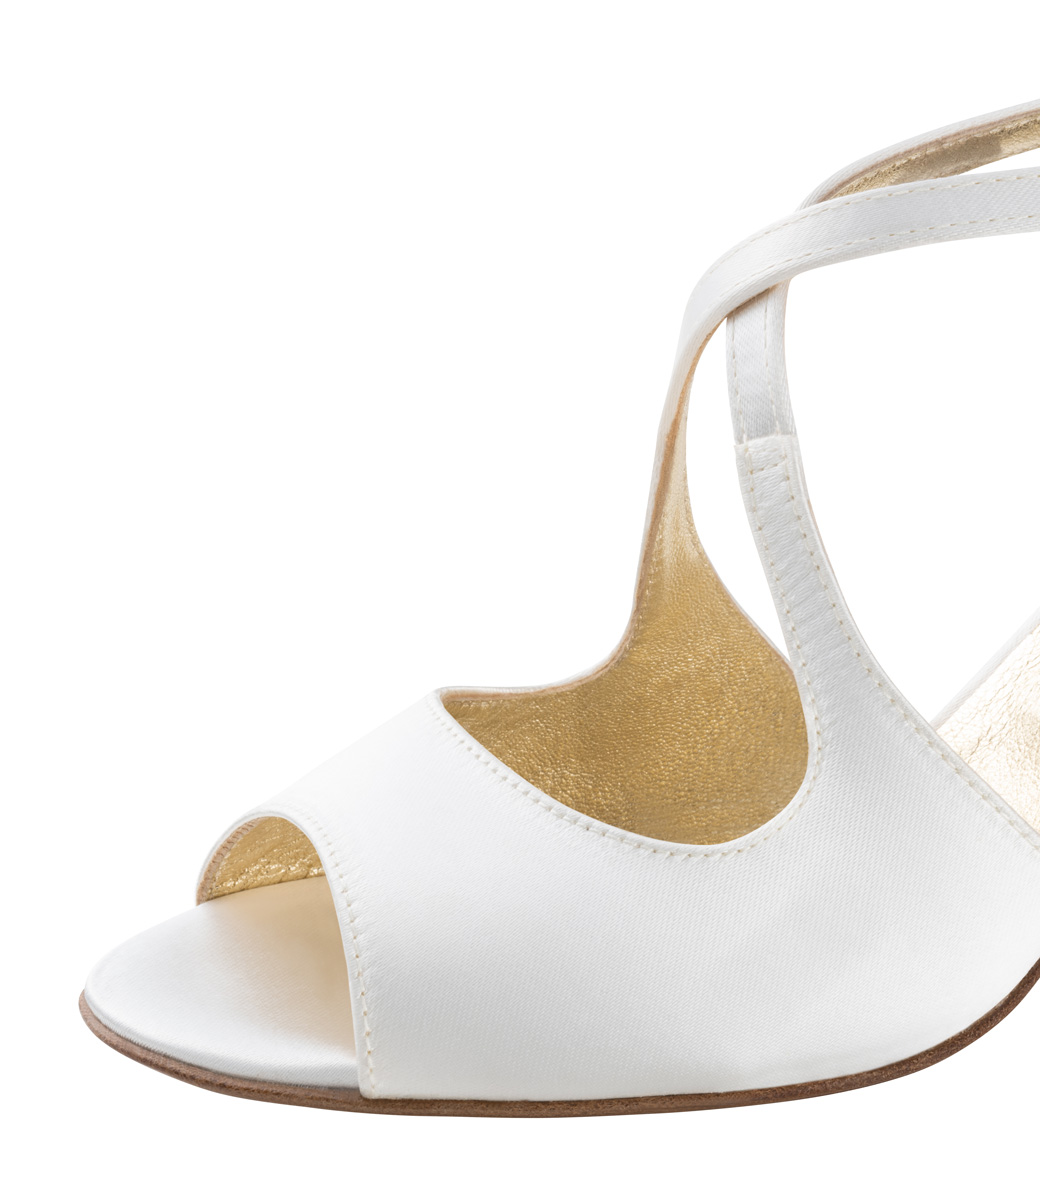 Detailed view of Nueva Epoca bridal shoe with leather sole